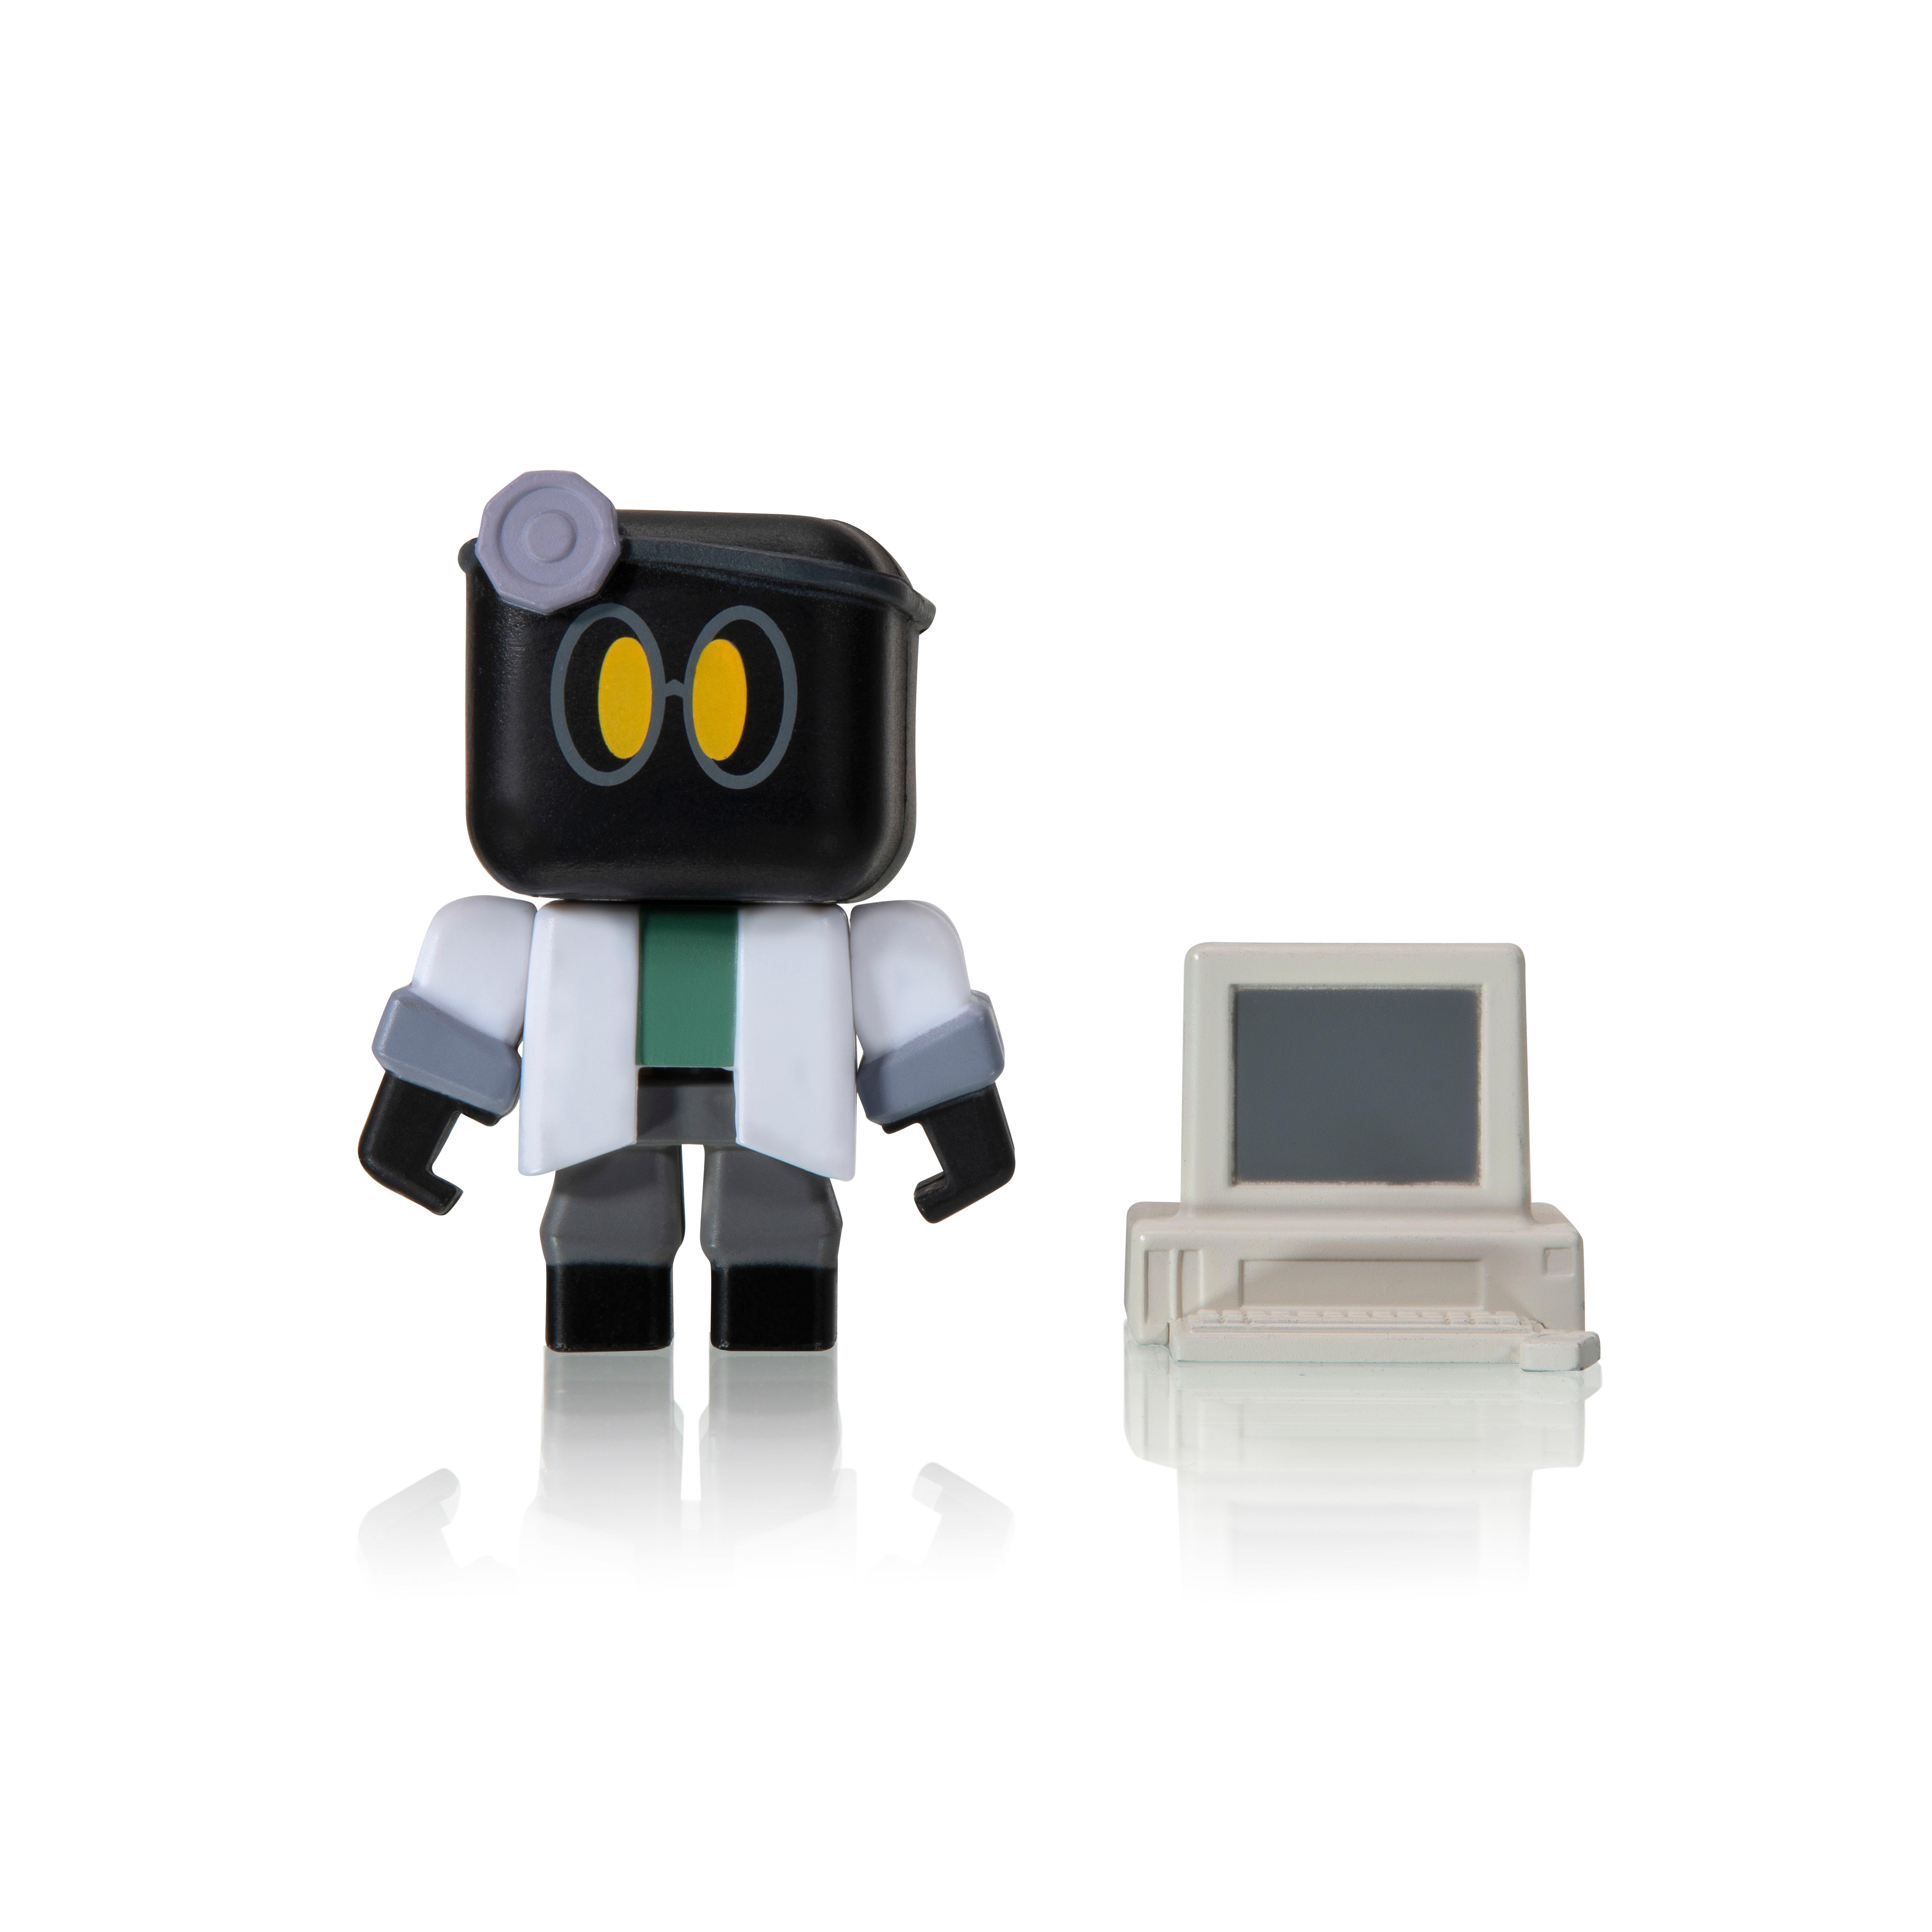 Roblox Action Collection Series 8 Mystery Figure Includes 1 Figure And Exclusive Virtual Item Gamestop - roblox character roblox toys